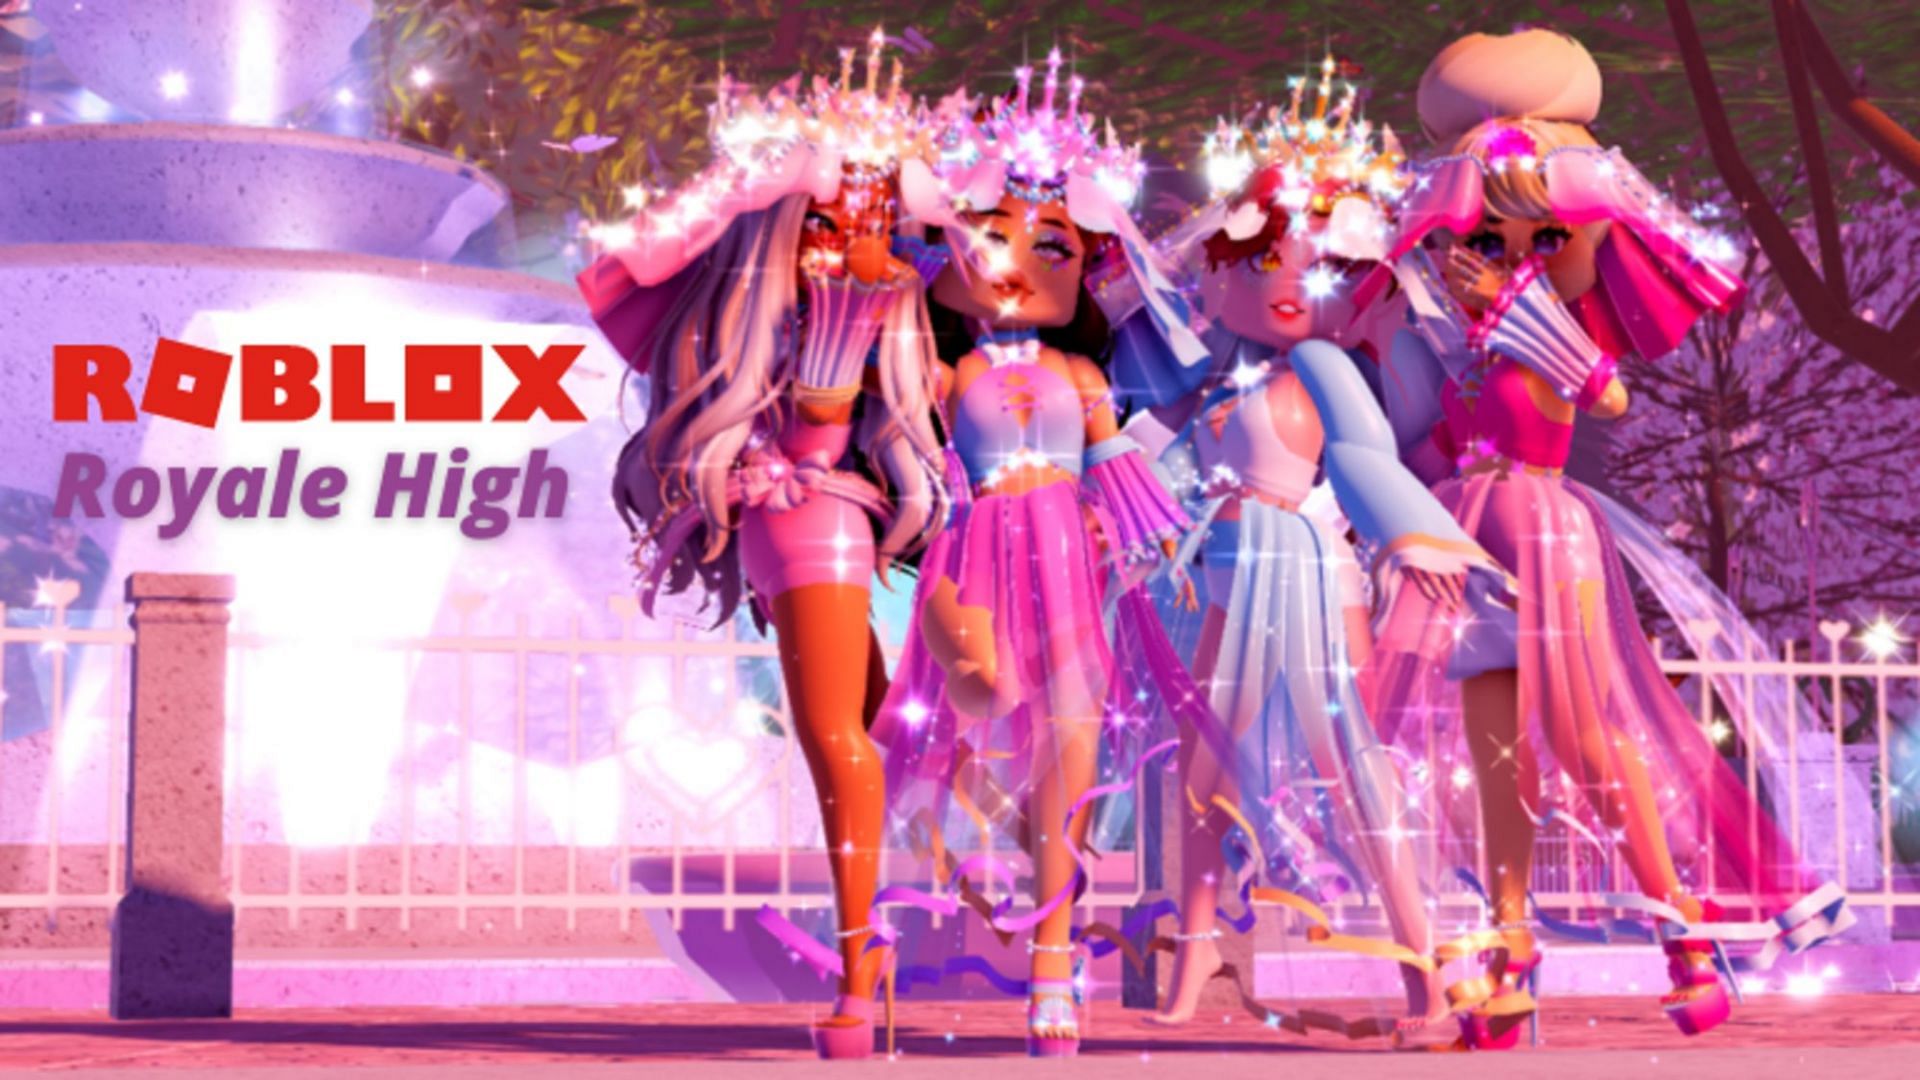 5 best-looking skirts in Roblox Royale High (June 2022)